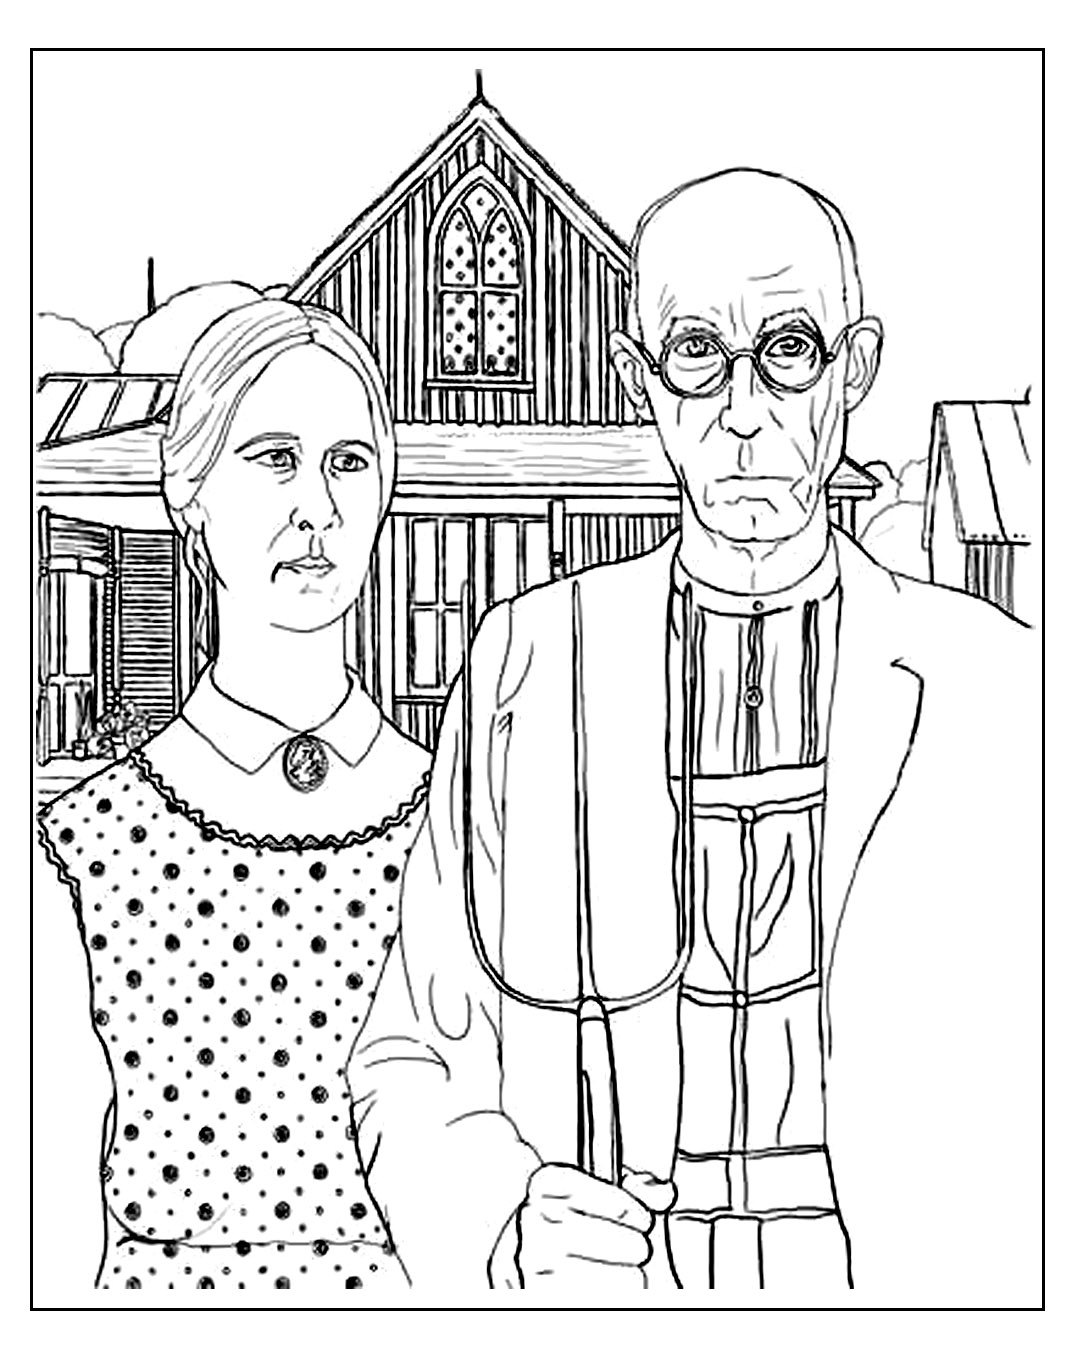 Grant wood american gothic - Masterpieces Adult Coloring Pages